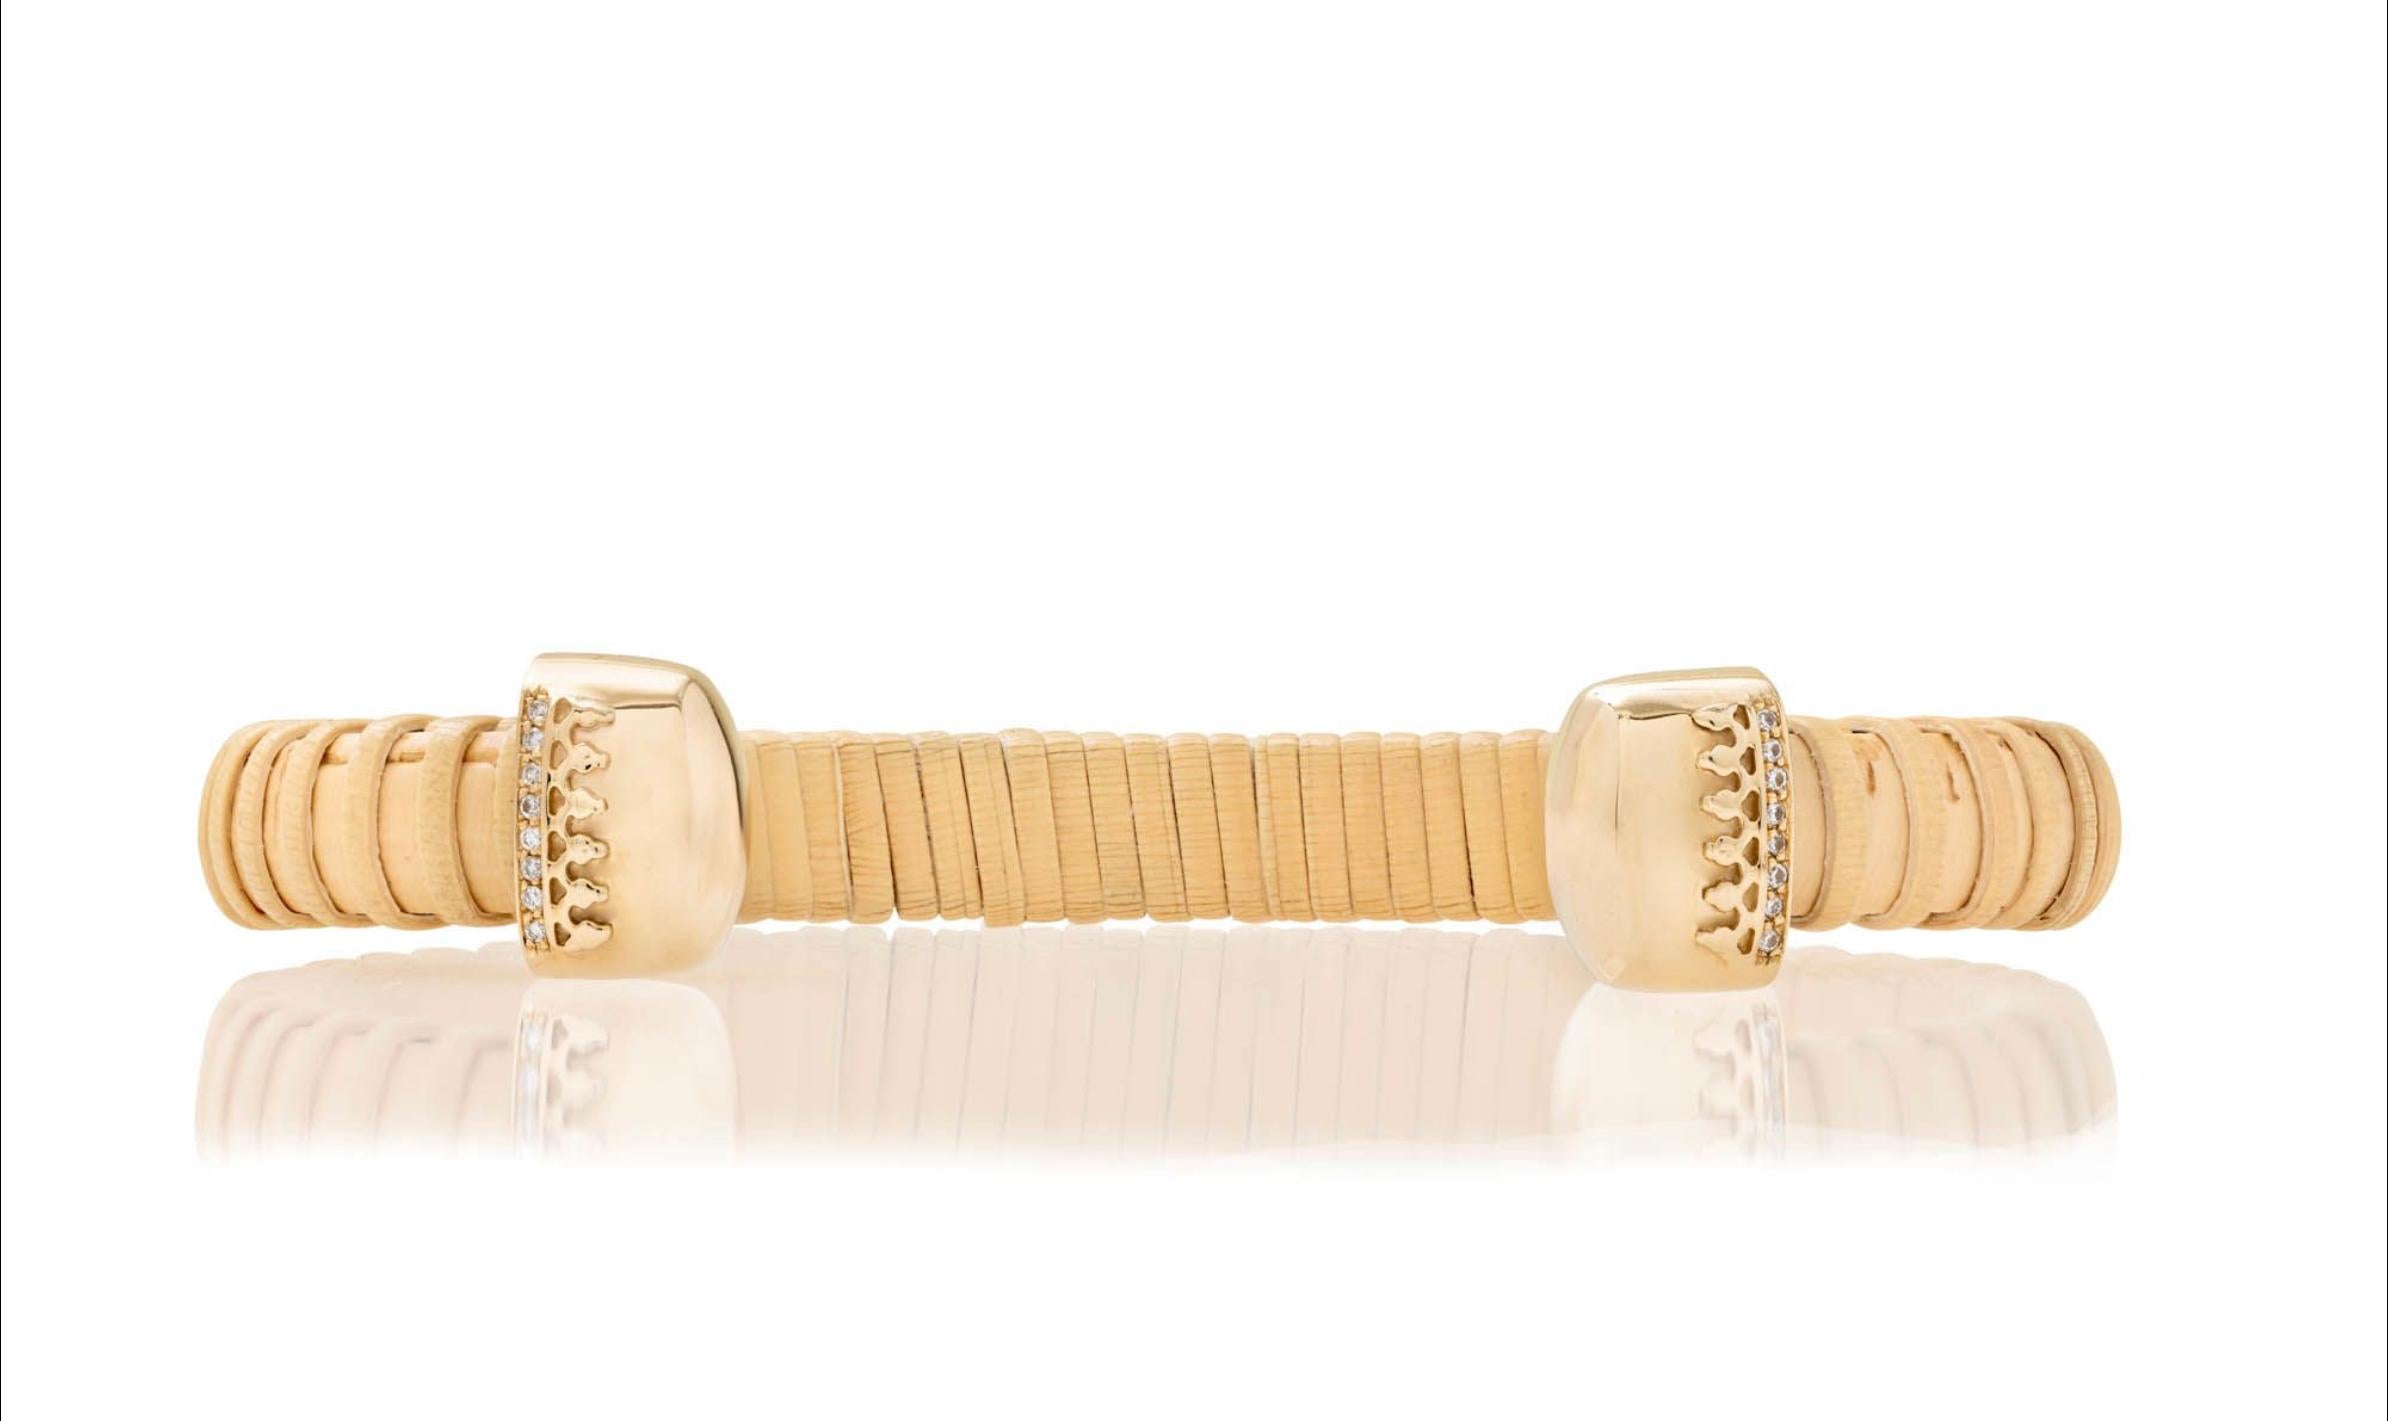 Nantucket Basket Lightship jewelry is a tradition in New England. This handmade cuff celebrates the tradition with a modern esthetic by adding gold and diamonds. Thin natural cain & rattan cuff with 10K yellow gold caps and 14K yellow gold filigree